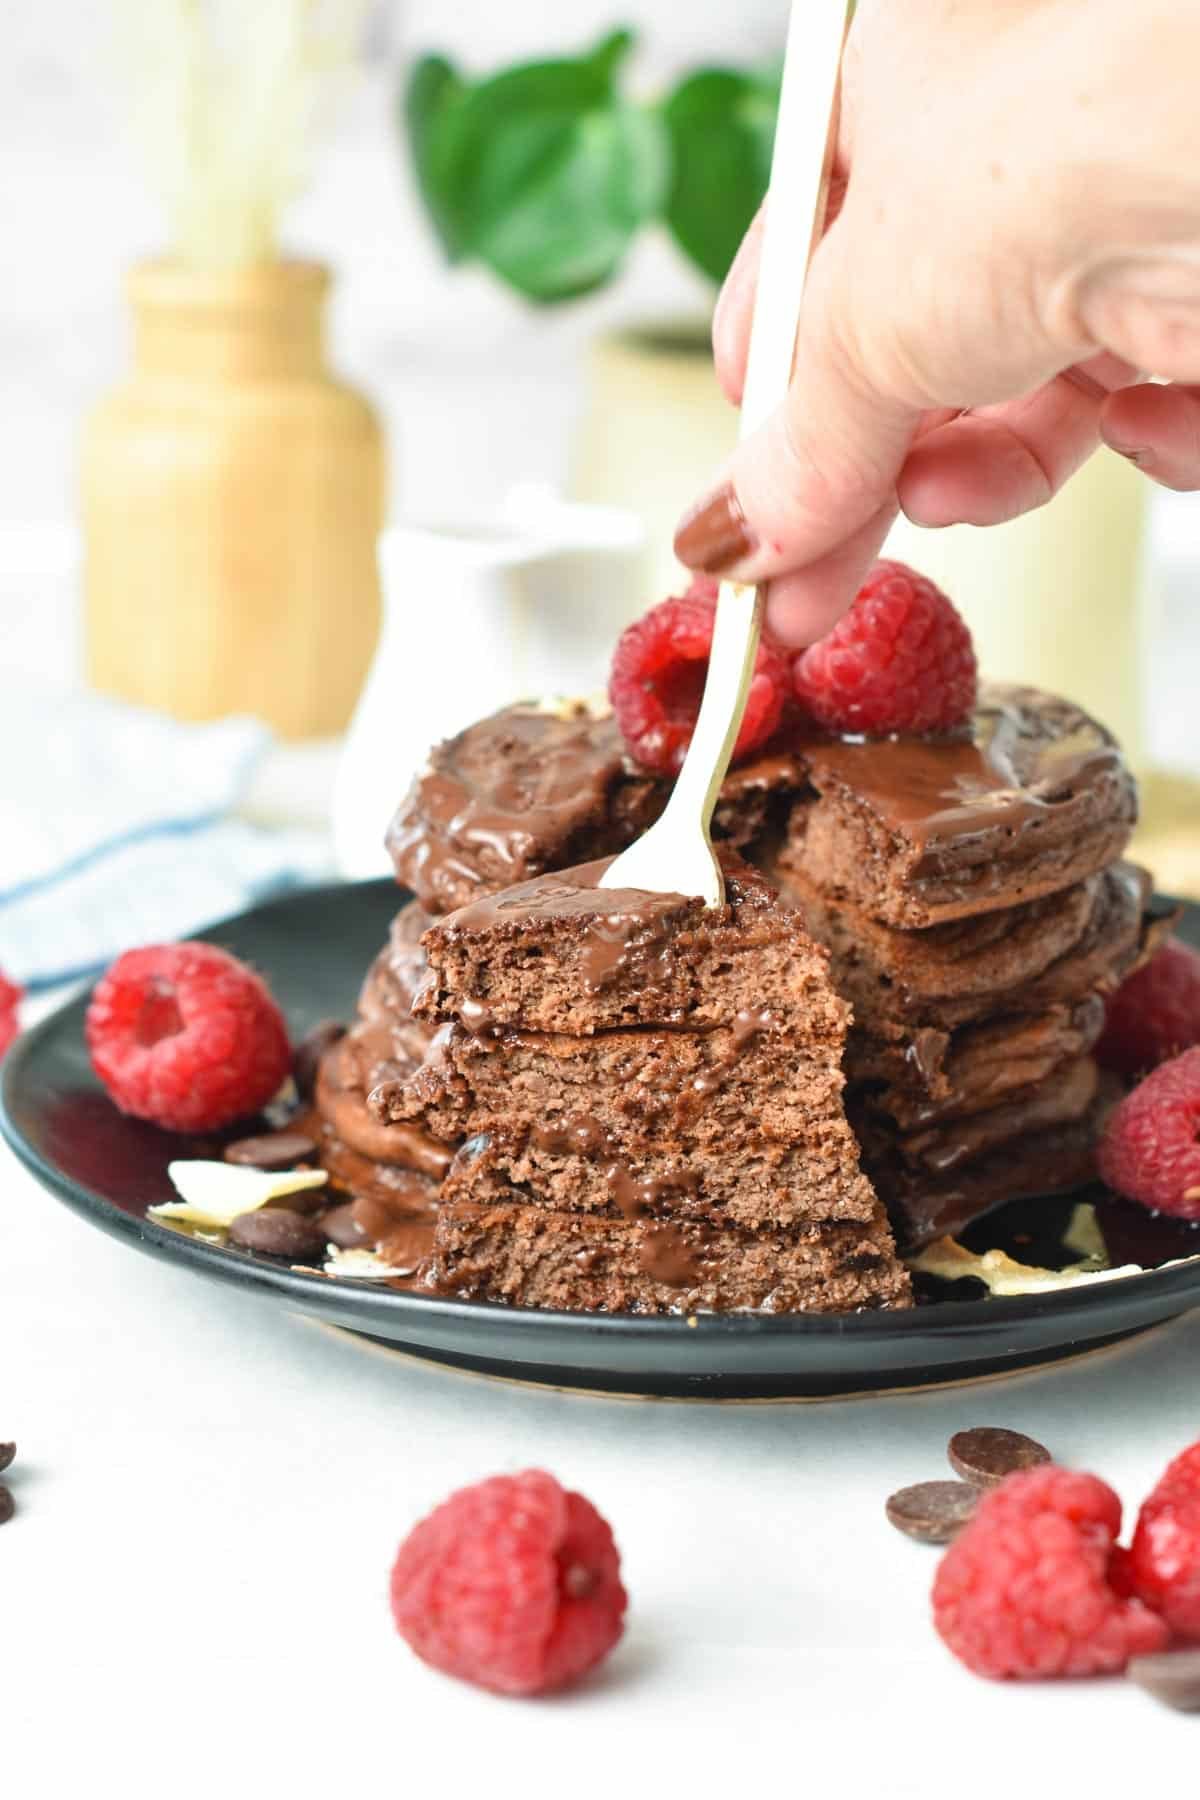 A stack of Chocolate Protein Pancakes with chocolate sauce on top and fresh raspberries and a fork showing a portion of the stack cut.